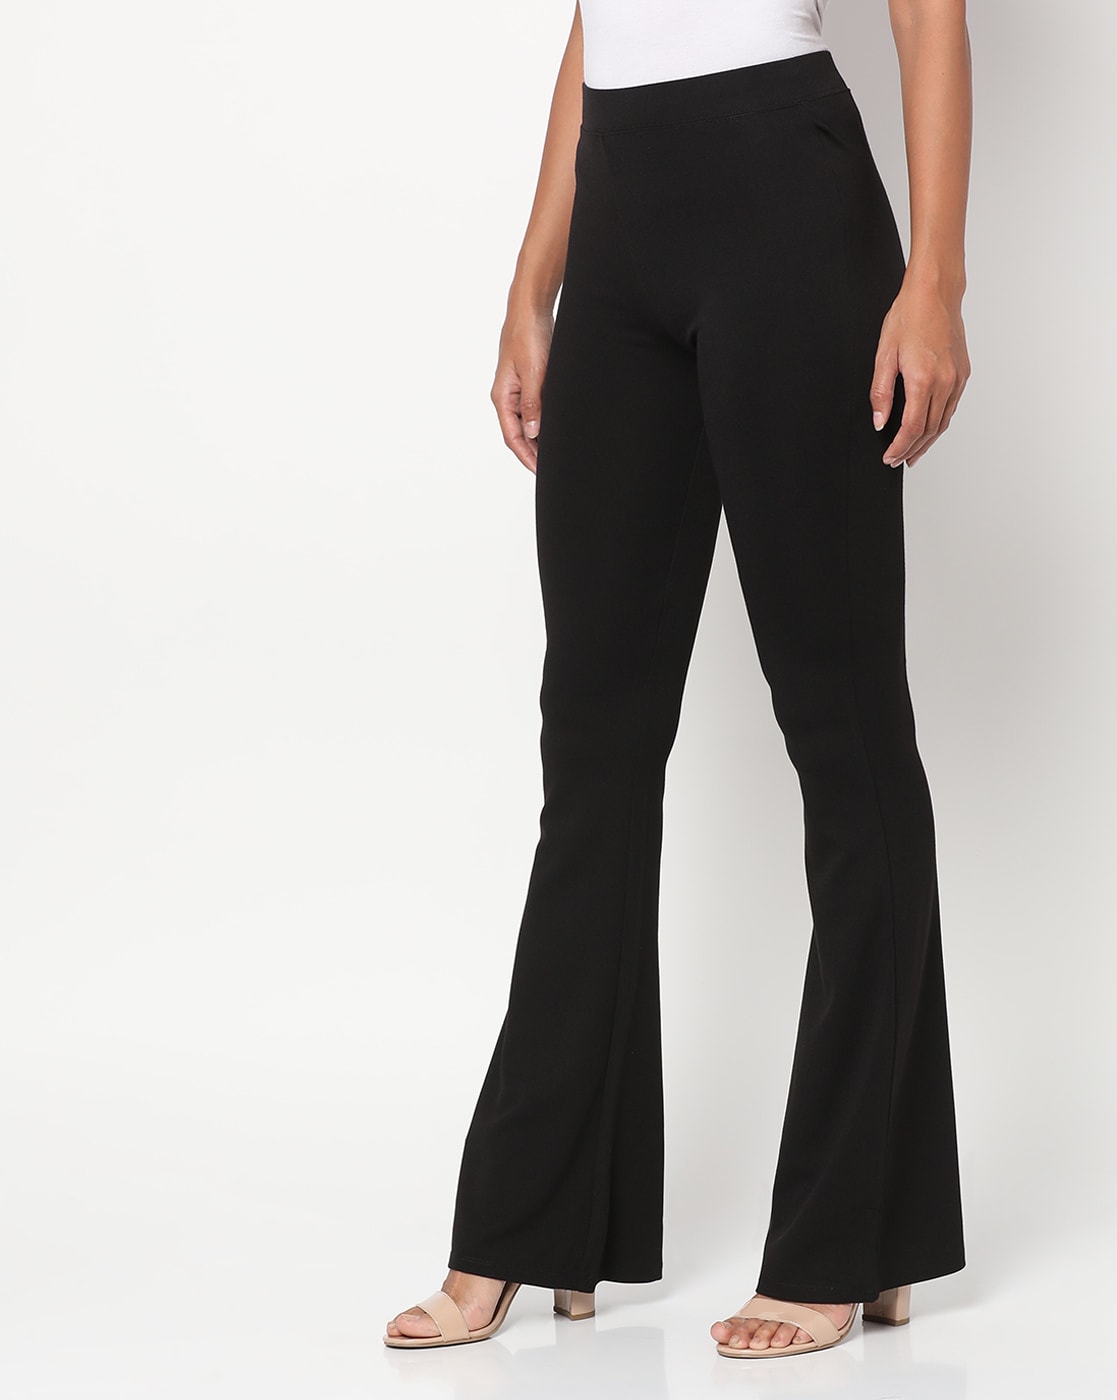 Fit & Flare High Waisted Pocket Pants in Graphite – GLOWco